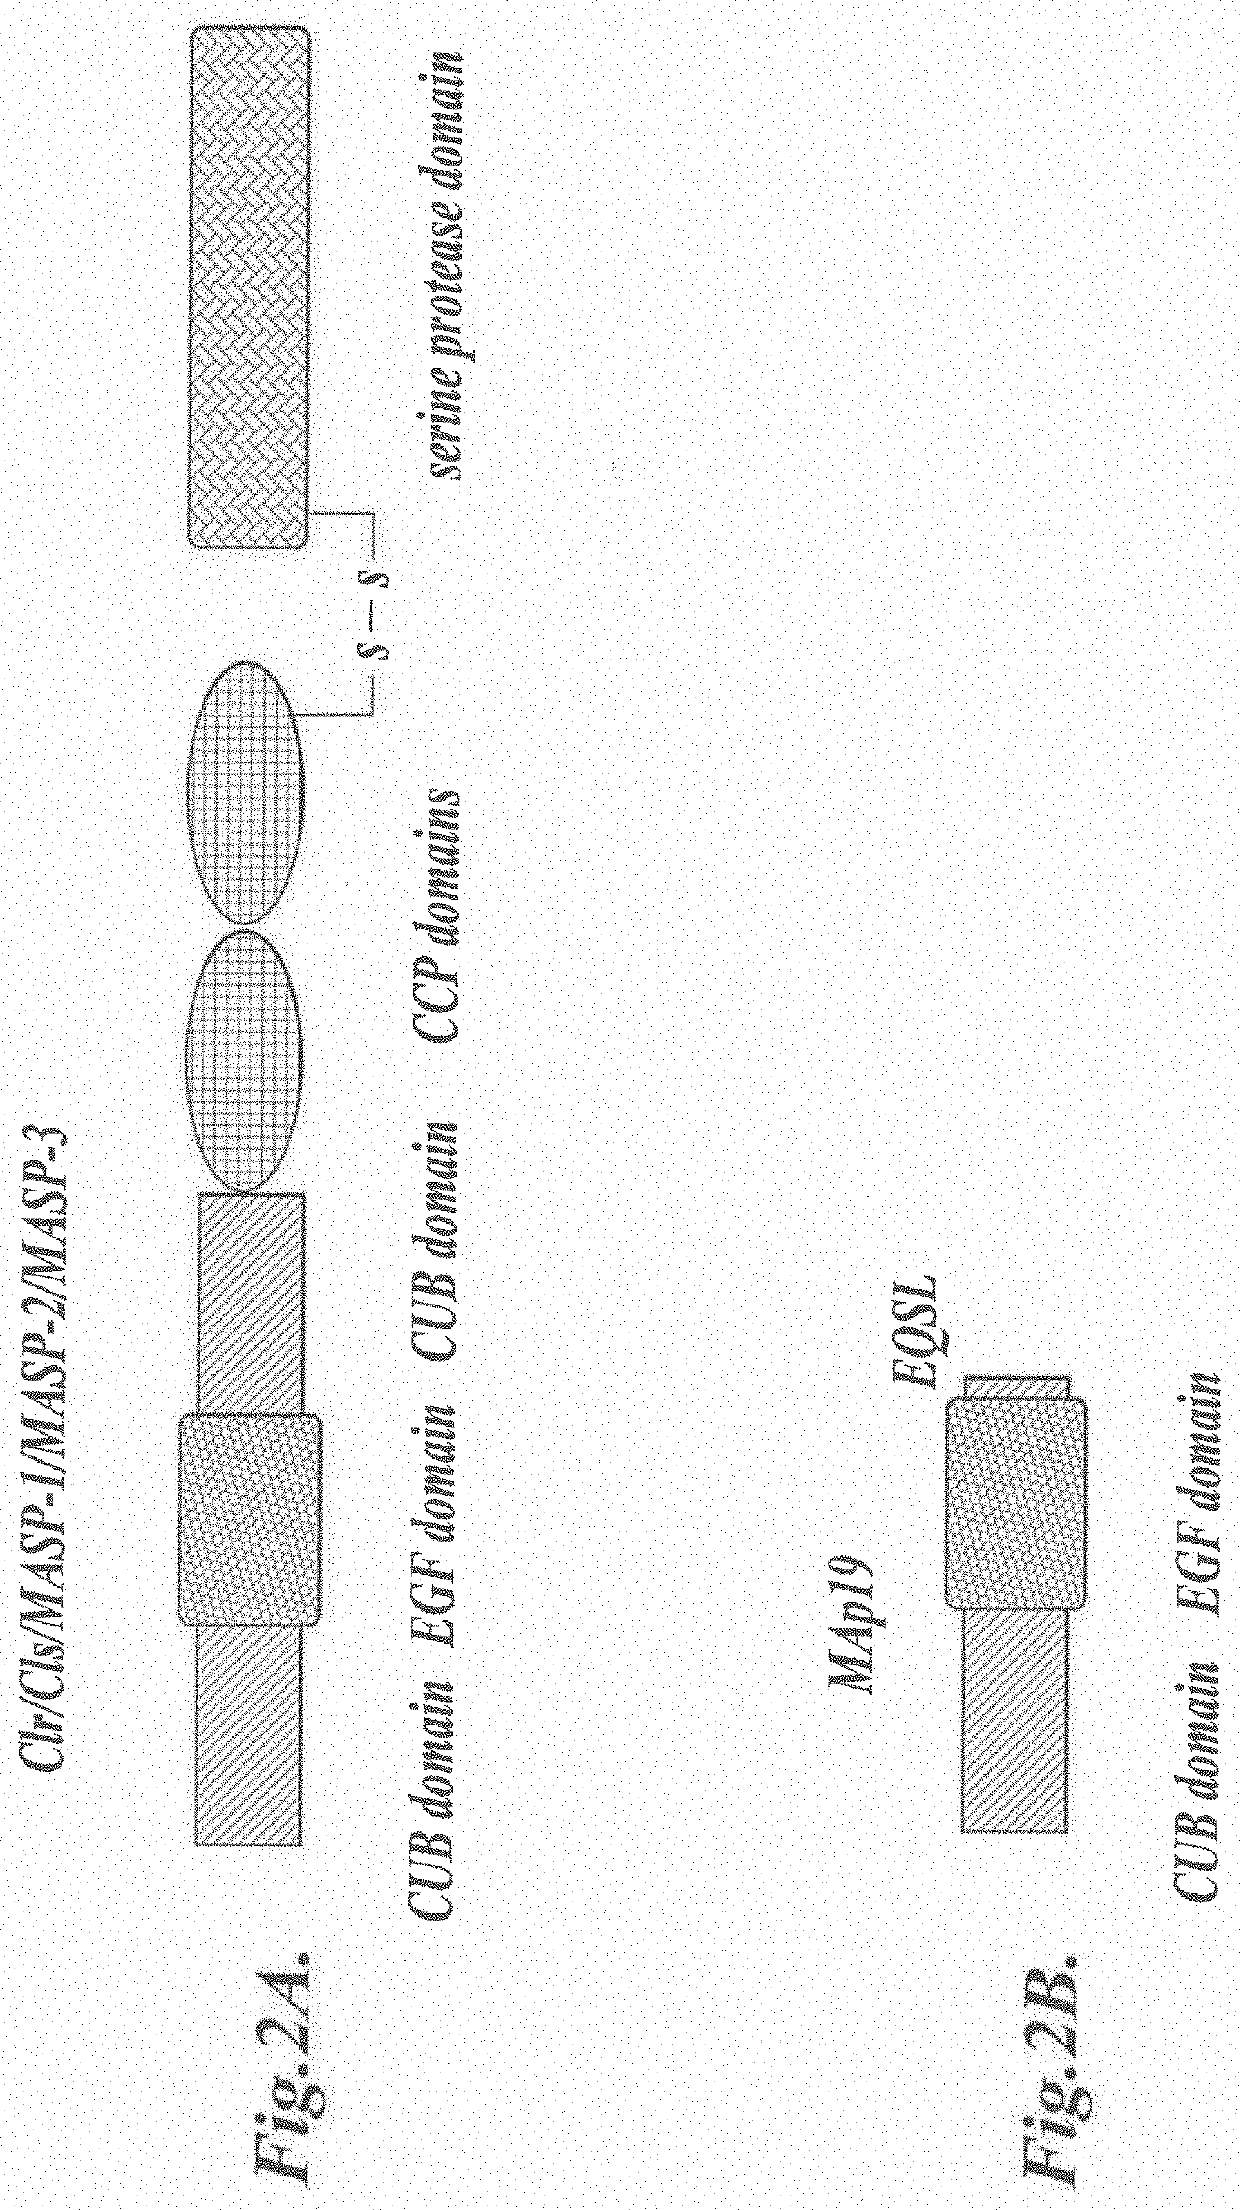 Methods for treating and/or preventing  idiopathic pneumonia syndrome (IPS) and/or capillary leak syndrome (CLS) and/or engraftment syndrome (ES) and/or fluid overload (FO) associated with hematopoietic stem cell transplant